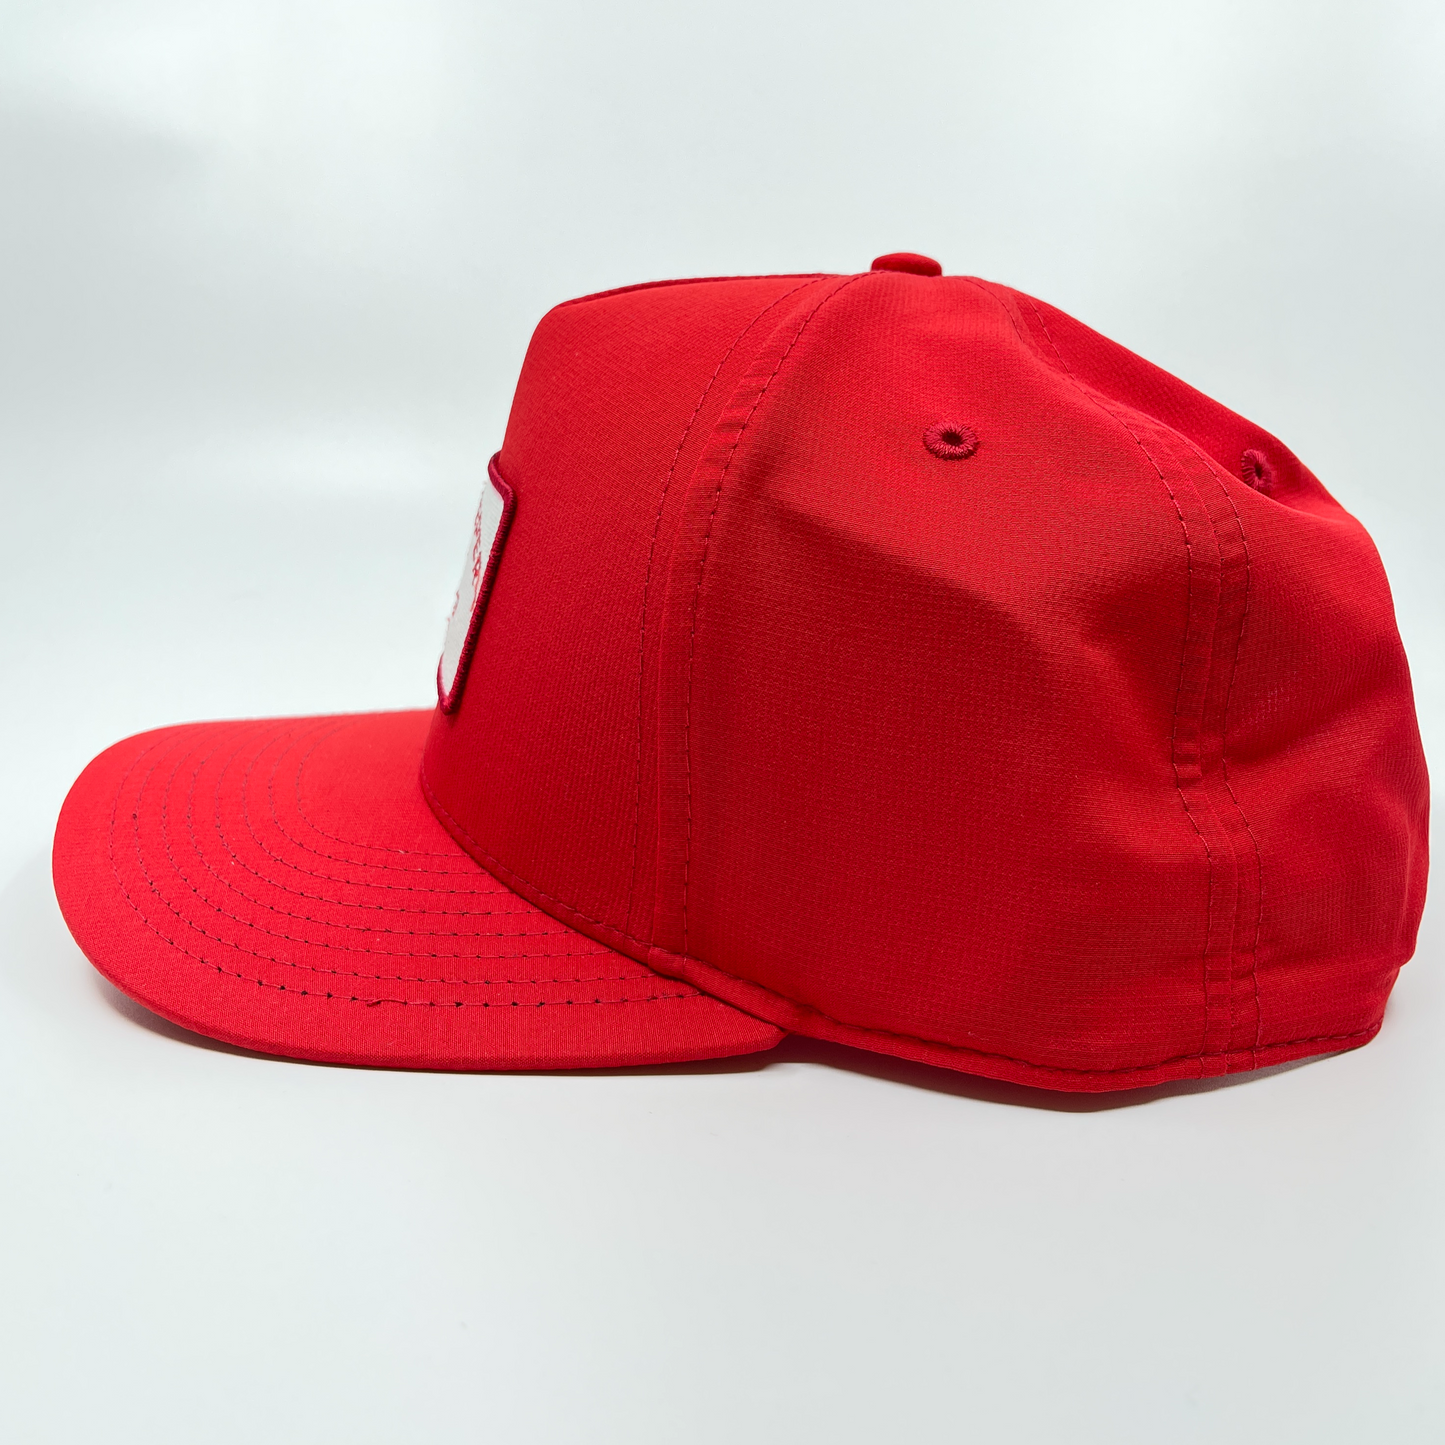 Goosekeeper High Crown Adjustable-Fit Cap Red with White Patch